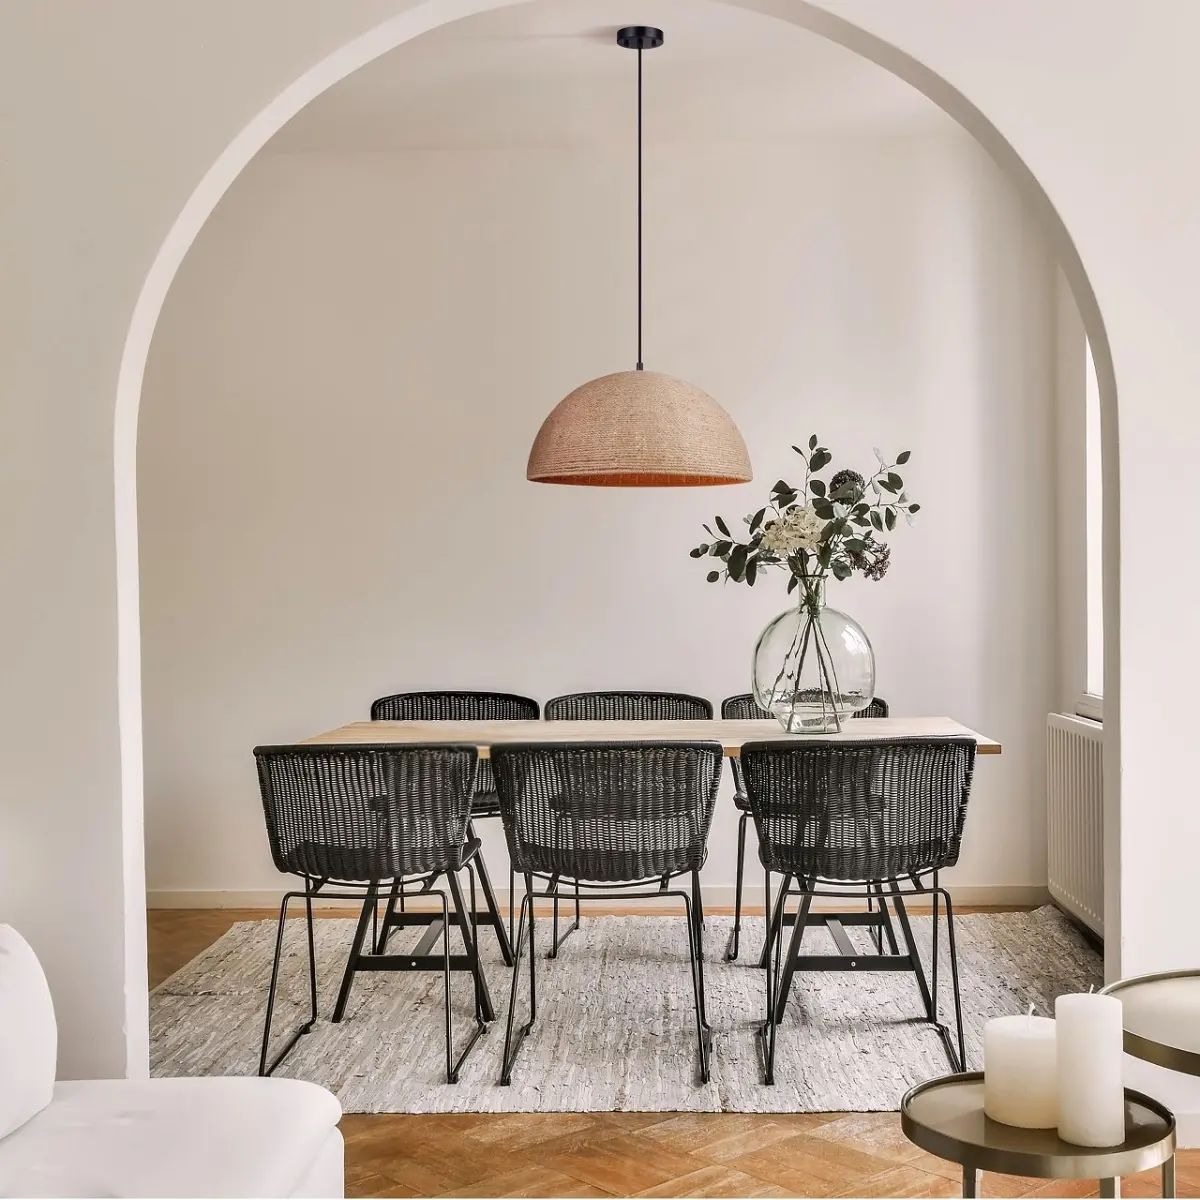 a dining room with minimal furniture and styled with a semi-circular pendant light reminiscent of bohemian style lighting to enhance the space